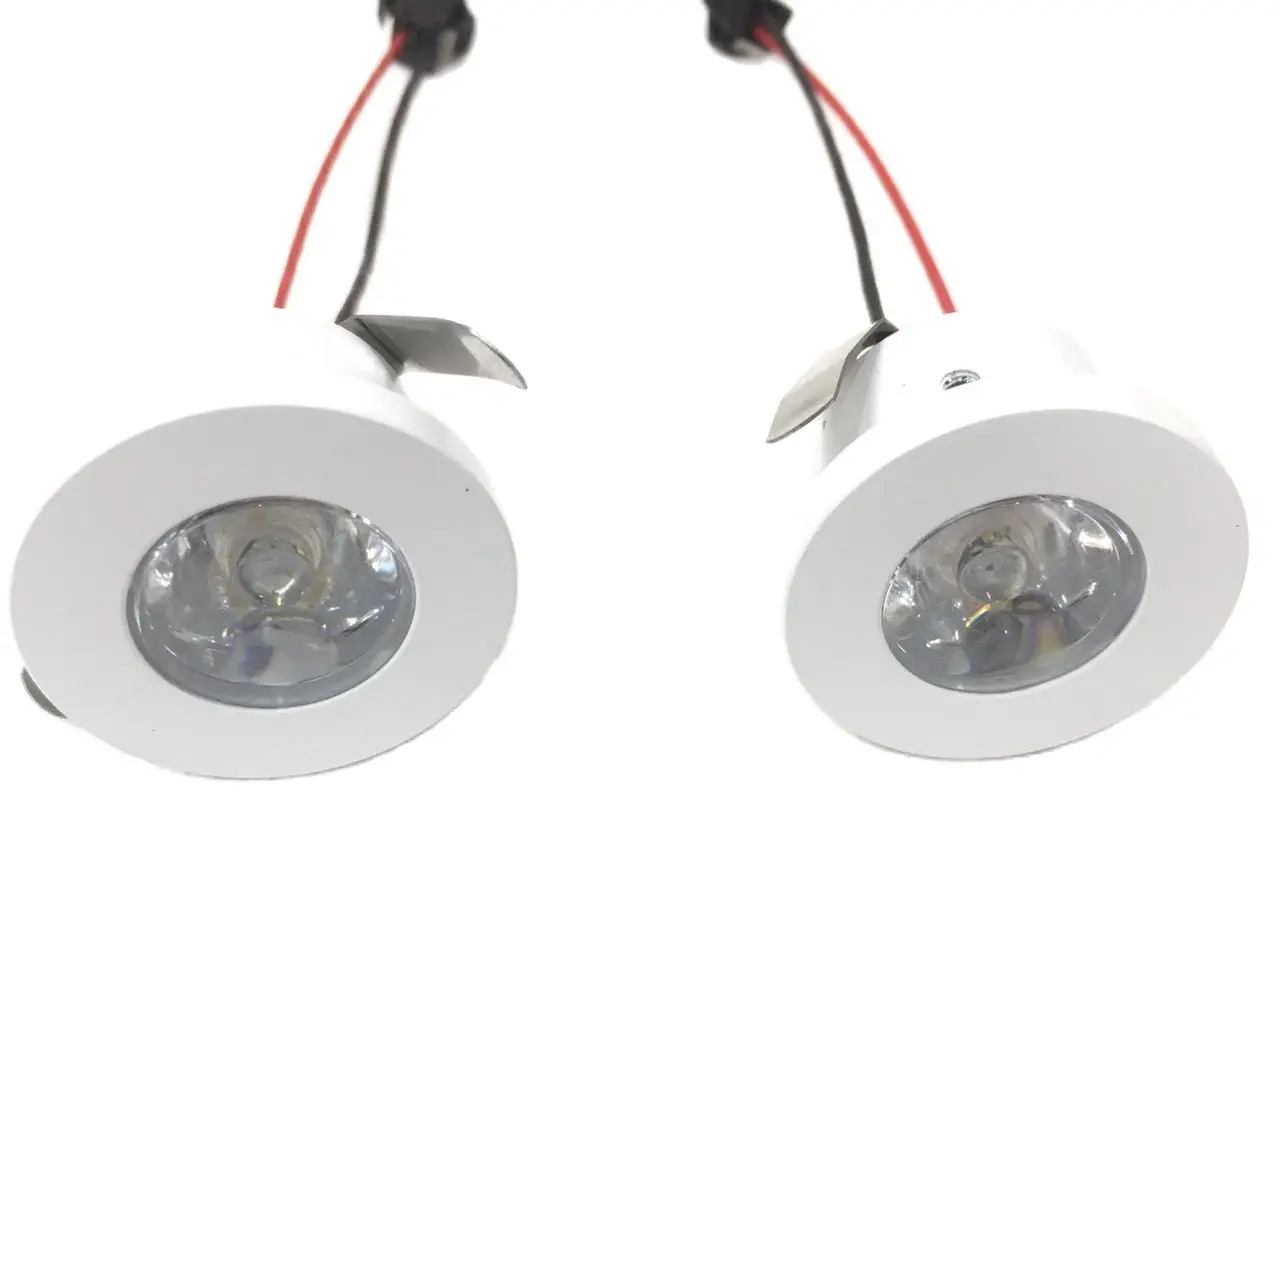 

wholesale wholesale For Kitchen 5pcs/lot Gold Led Cabinet Downlight 1w Diameter 31mm Dc12v Silver Frame Recessed